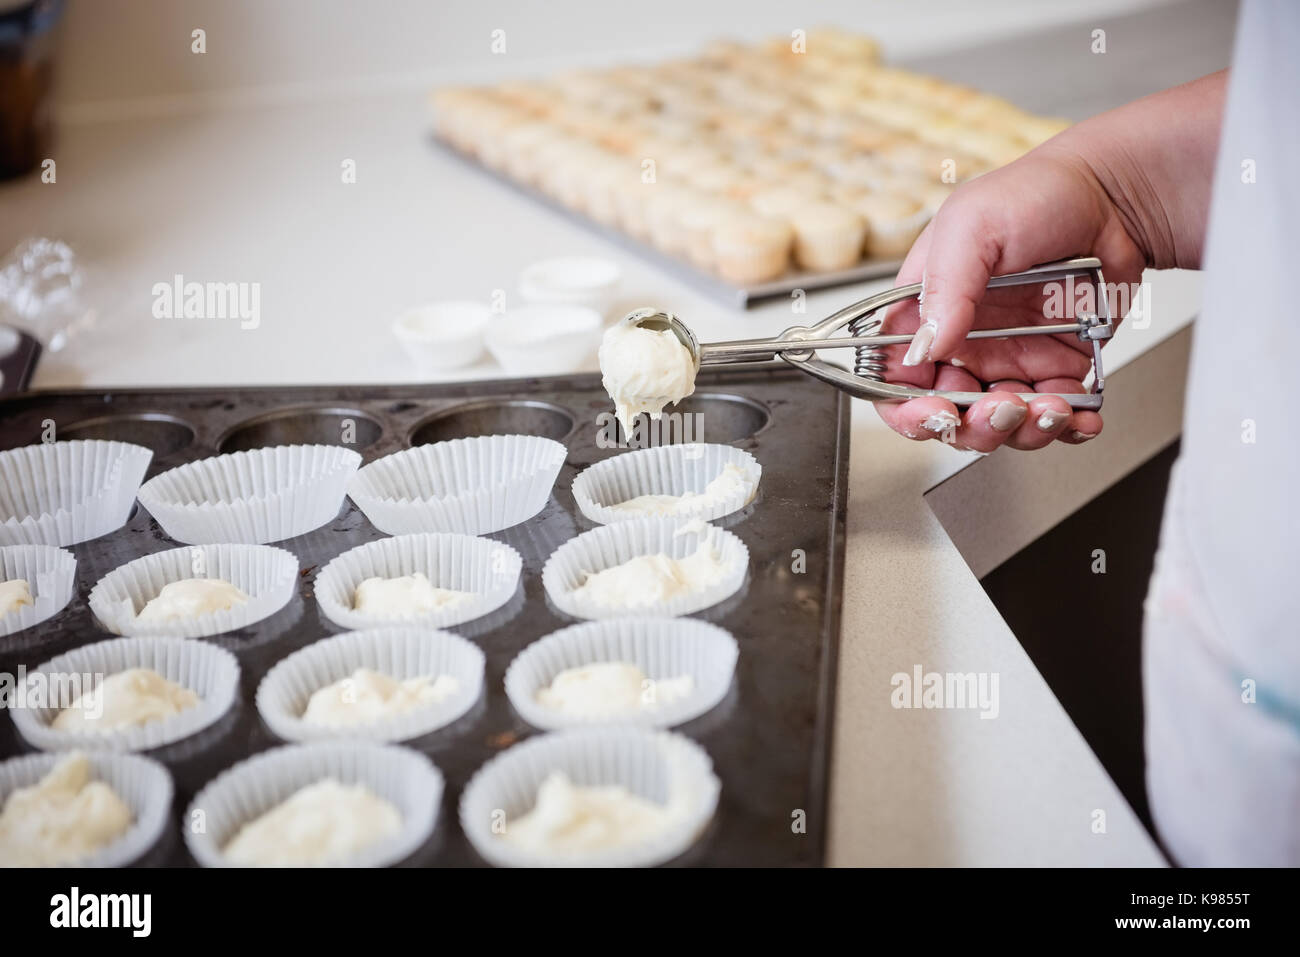 Scooping Batter With Batter Scooper Into Cupcake Pan Lined Stock Photo -  Download Image Now - iStock